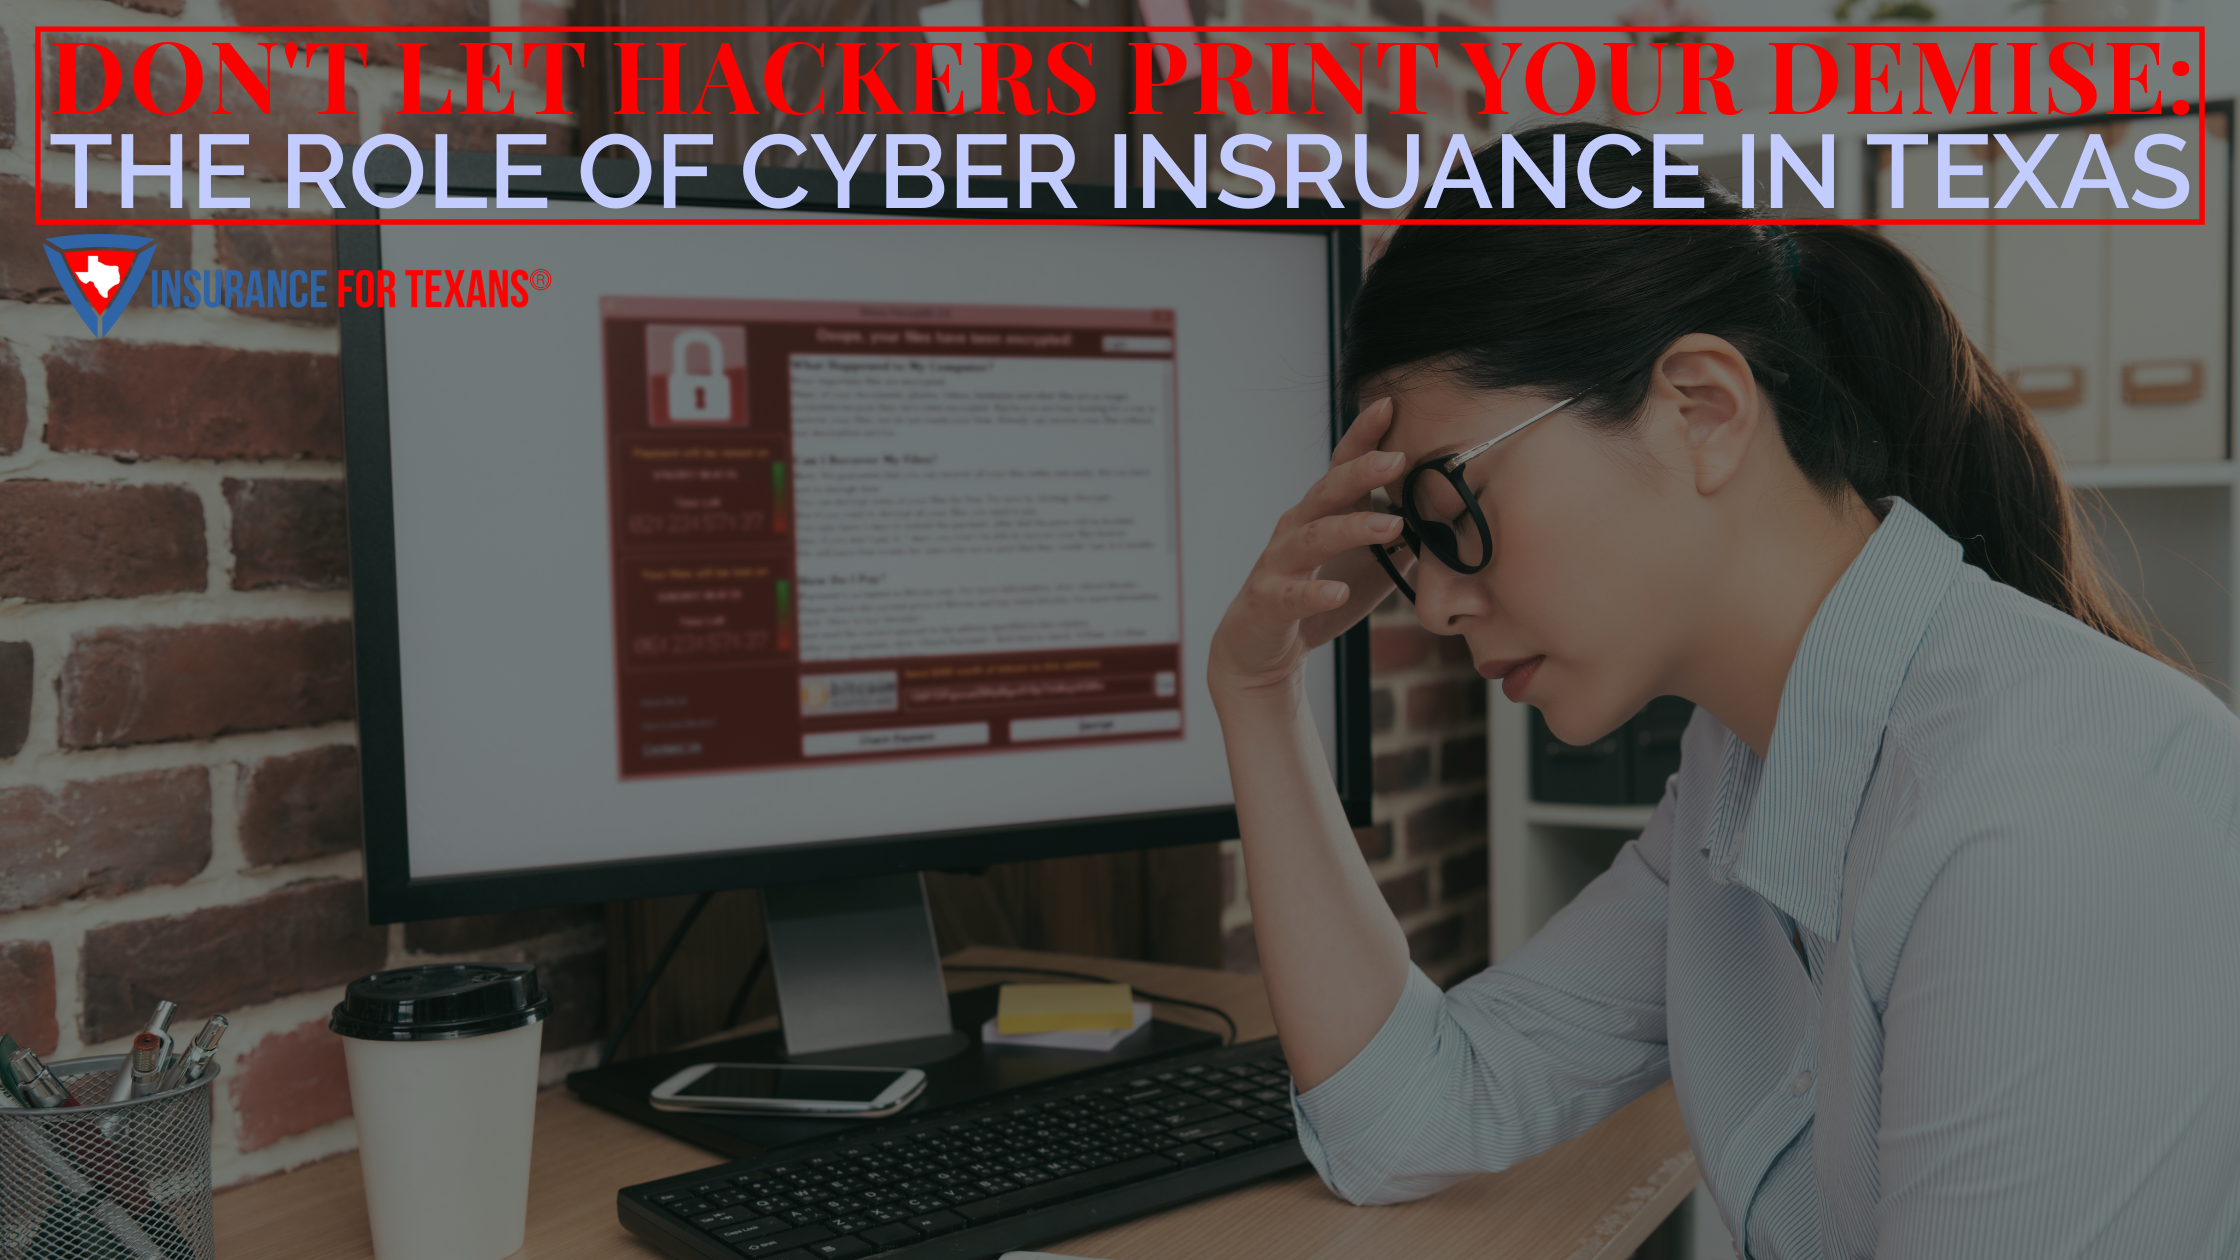 Don't Let Hackers Print Your Demise: The Role of Cyber Insurance in Texas